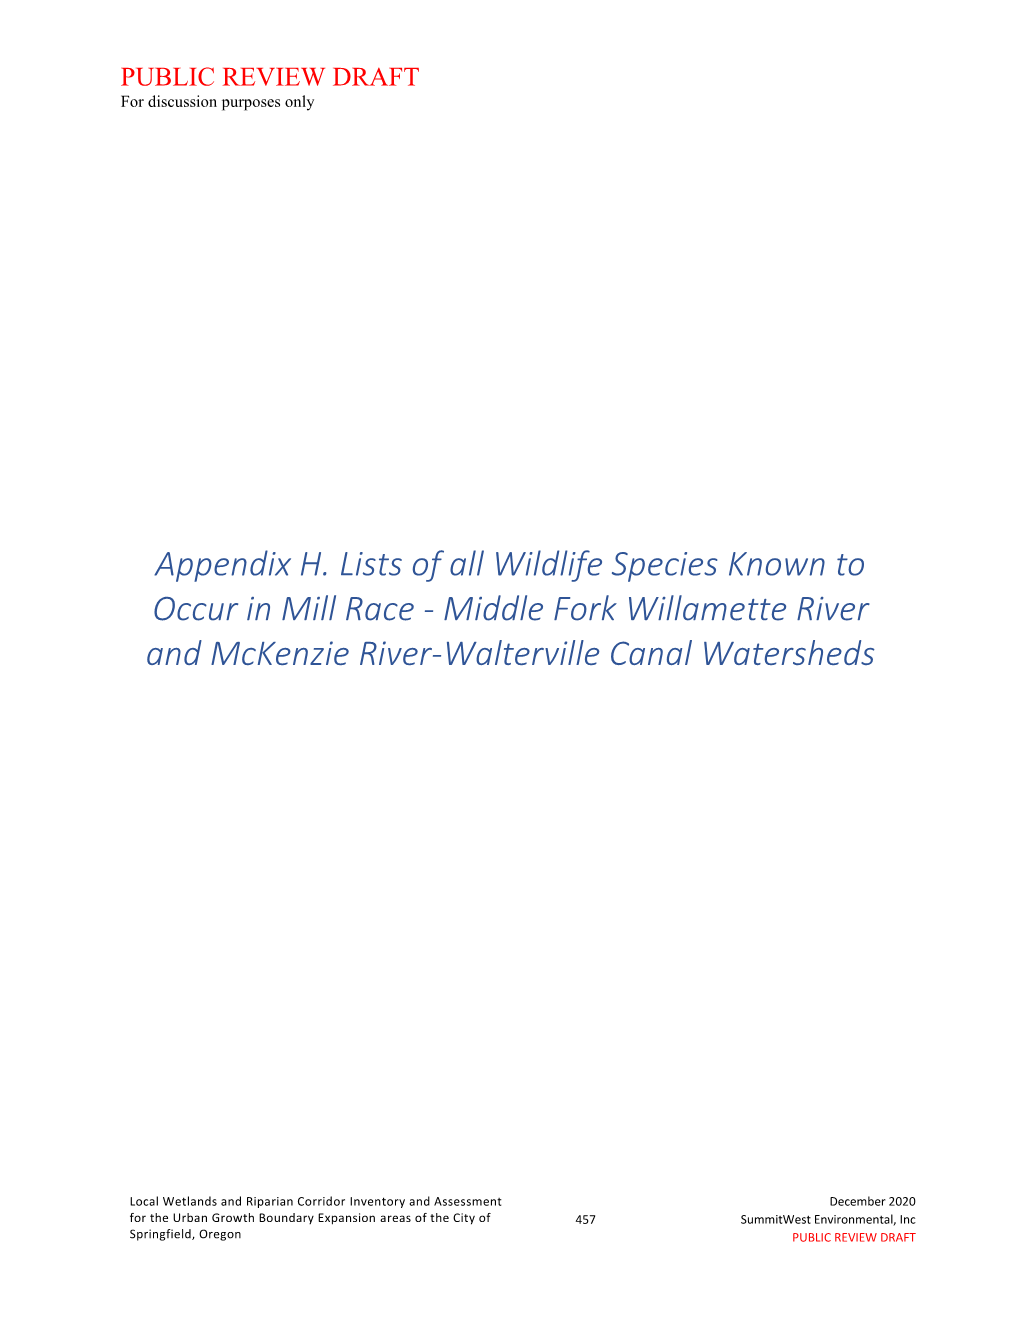 Wildlife Species Known to Occur in Mill Race - Middle Fork Willamette River and Mckenzie River-Walterville Canal Watersheds